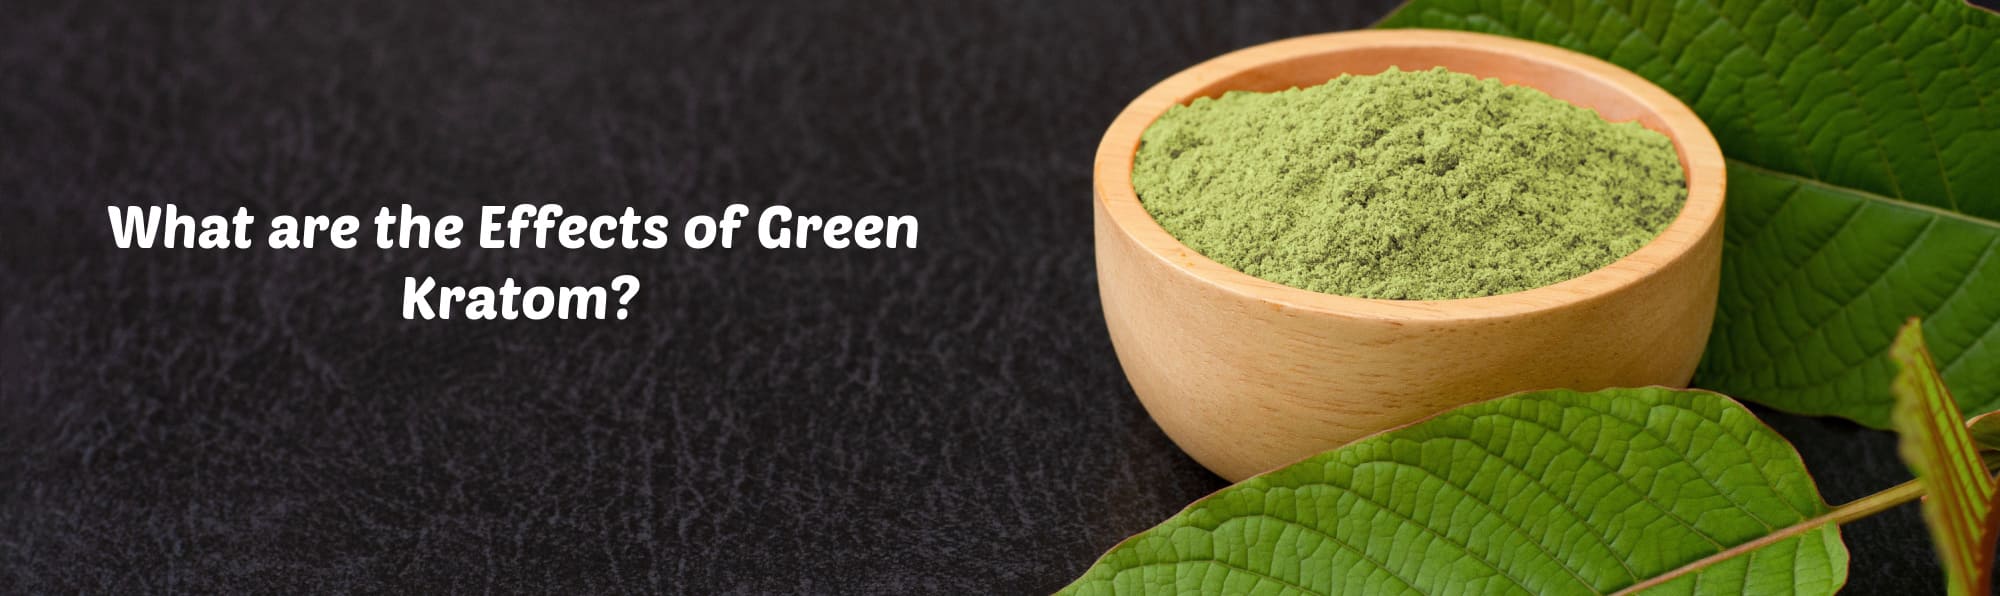 The Ultimate Guide to the Best Green Kratom and Its Effects